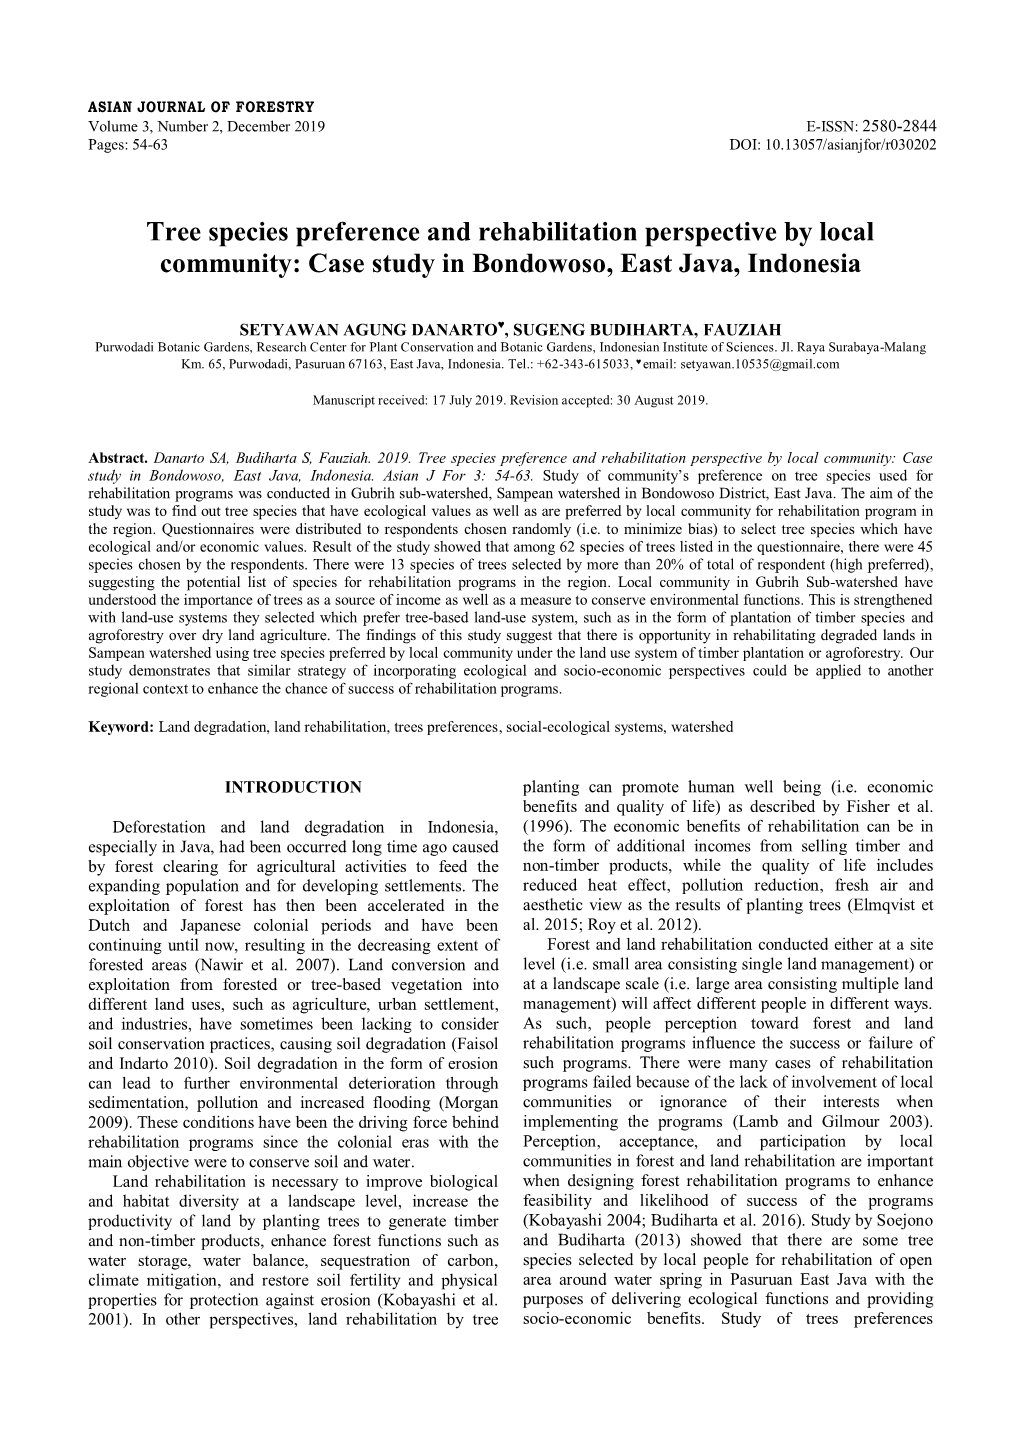 Tree Species Preference and Rehabilitation Perspective by Local Community: Case Study in Bondowoso, East Java, Indonesia